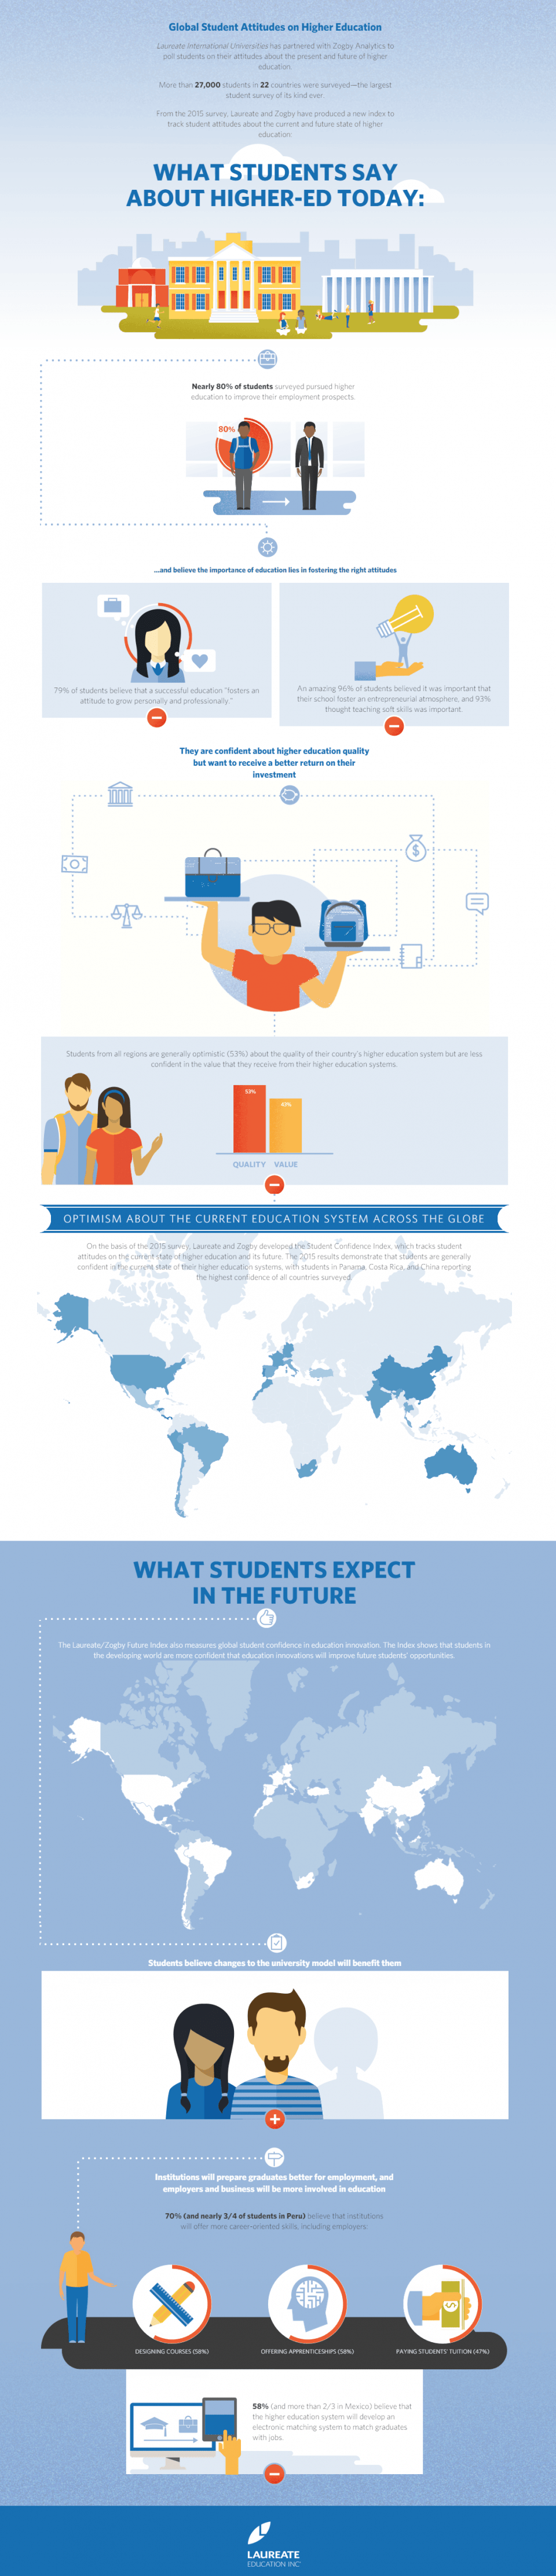 Global Student Attitudes on Higher Education Infographic